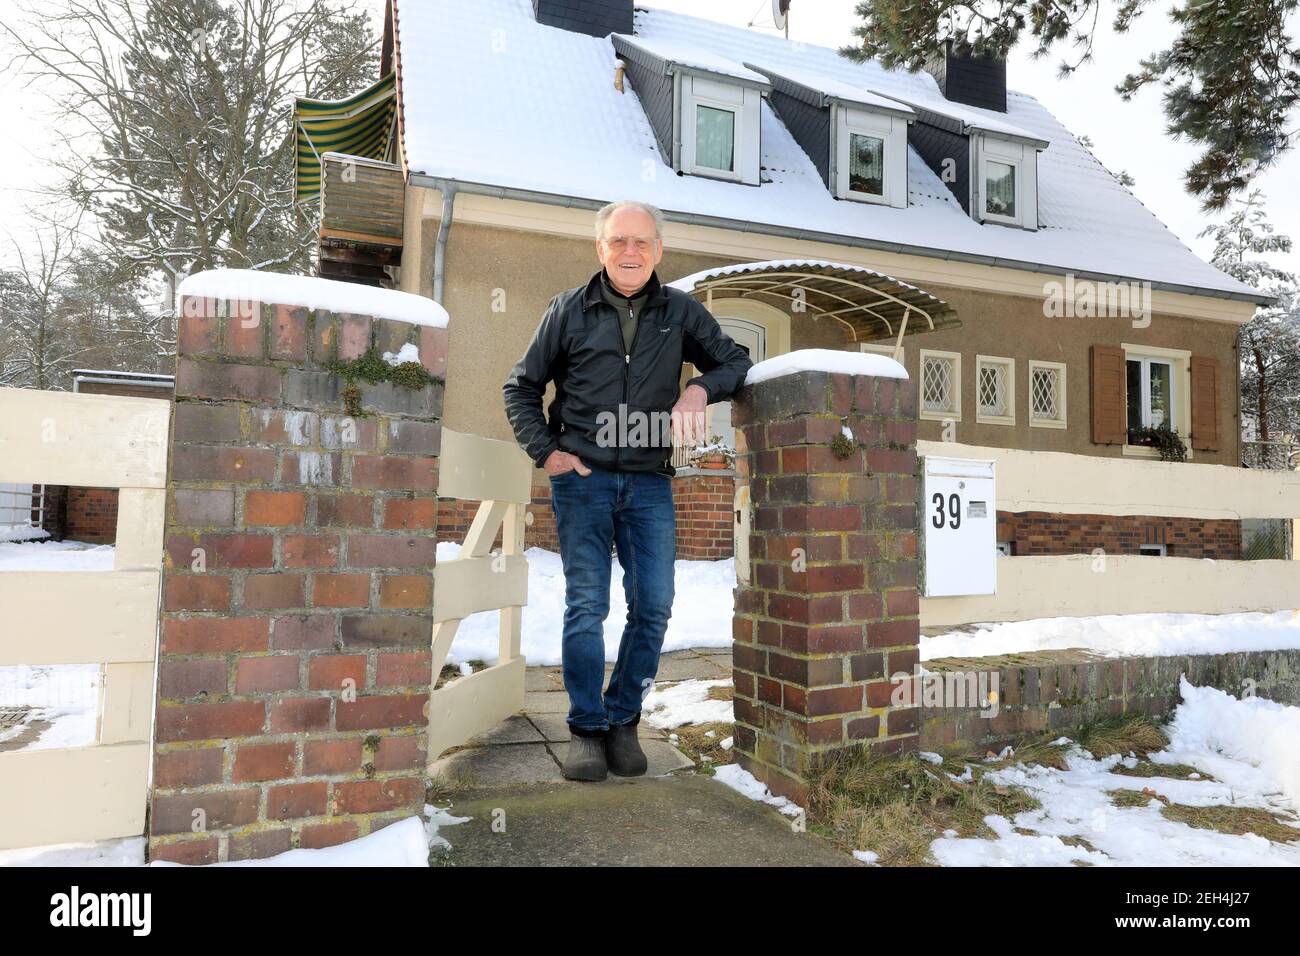 01 February 2021, Saxony-Anhalt, Heyrothsberge: Cycling legend Gustav-Adolf Schur stands in front of his house in Heyrothsberge. Schur will be 90 years old on 23.02.2021. In his active time, "Täve" triggered true storms of enthusiasm. Millions of people lined the streets when the nine-time GDR Sportsman of the Year and his team colleagues roared past on their racing bikes. Between 1950 and 1964, he celebrated successes that were unique in amateur sport. In 1955, the Heyrothsberg native became the first German rider to win the prestigious Peace Tour. Photo: Peter Gercke/dpa-Zentralbild/ZB Stock Photo